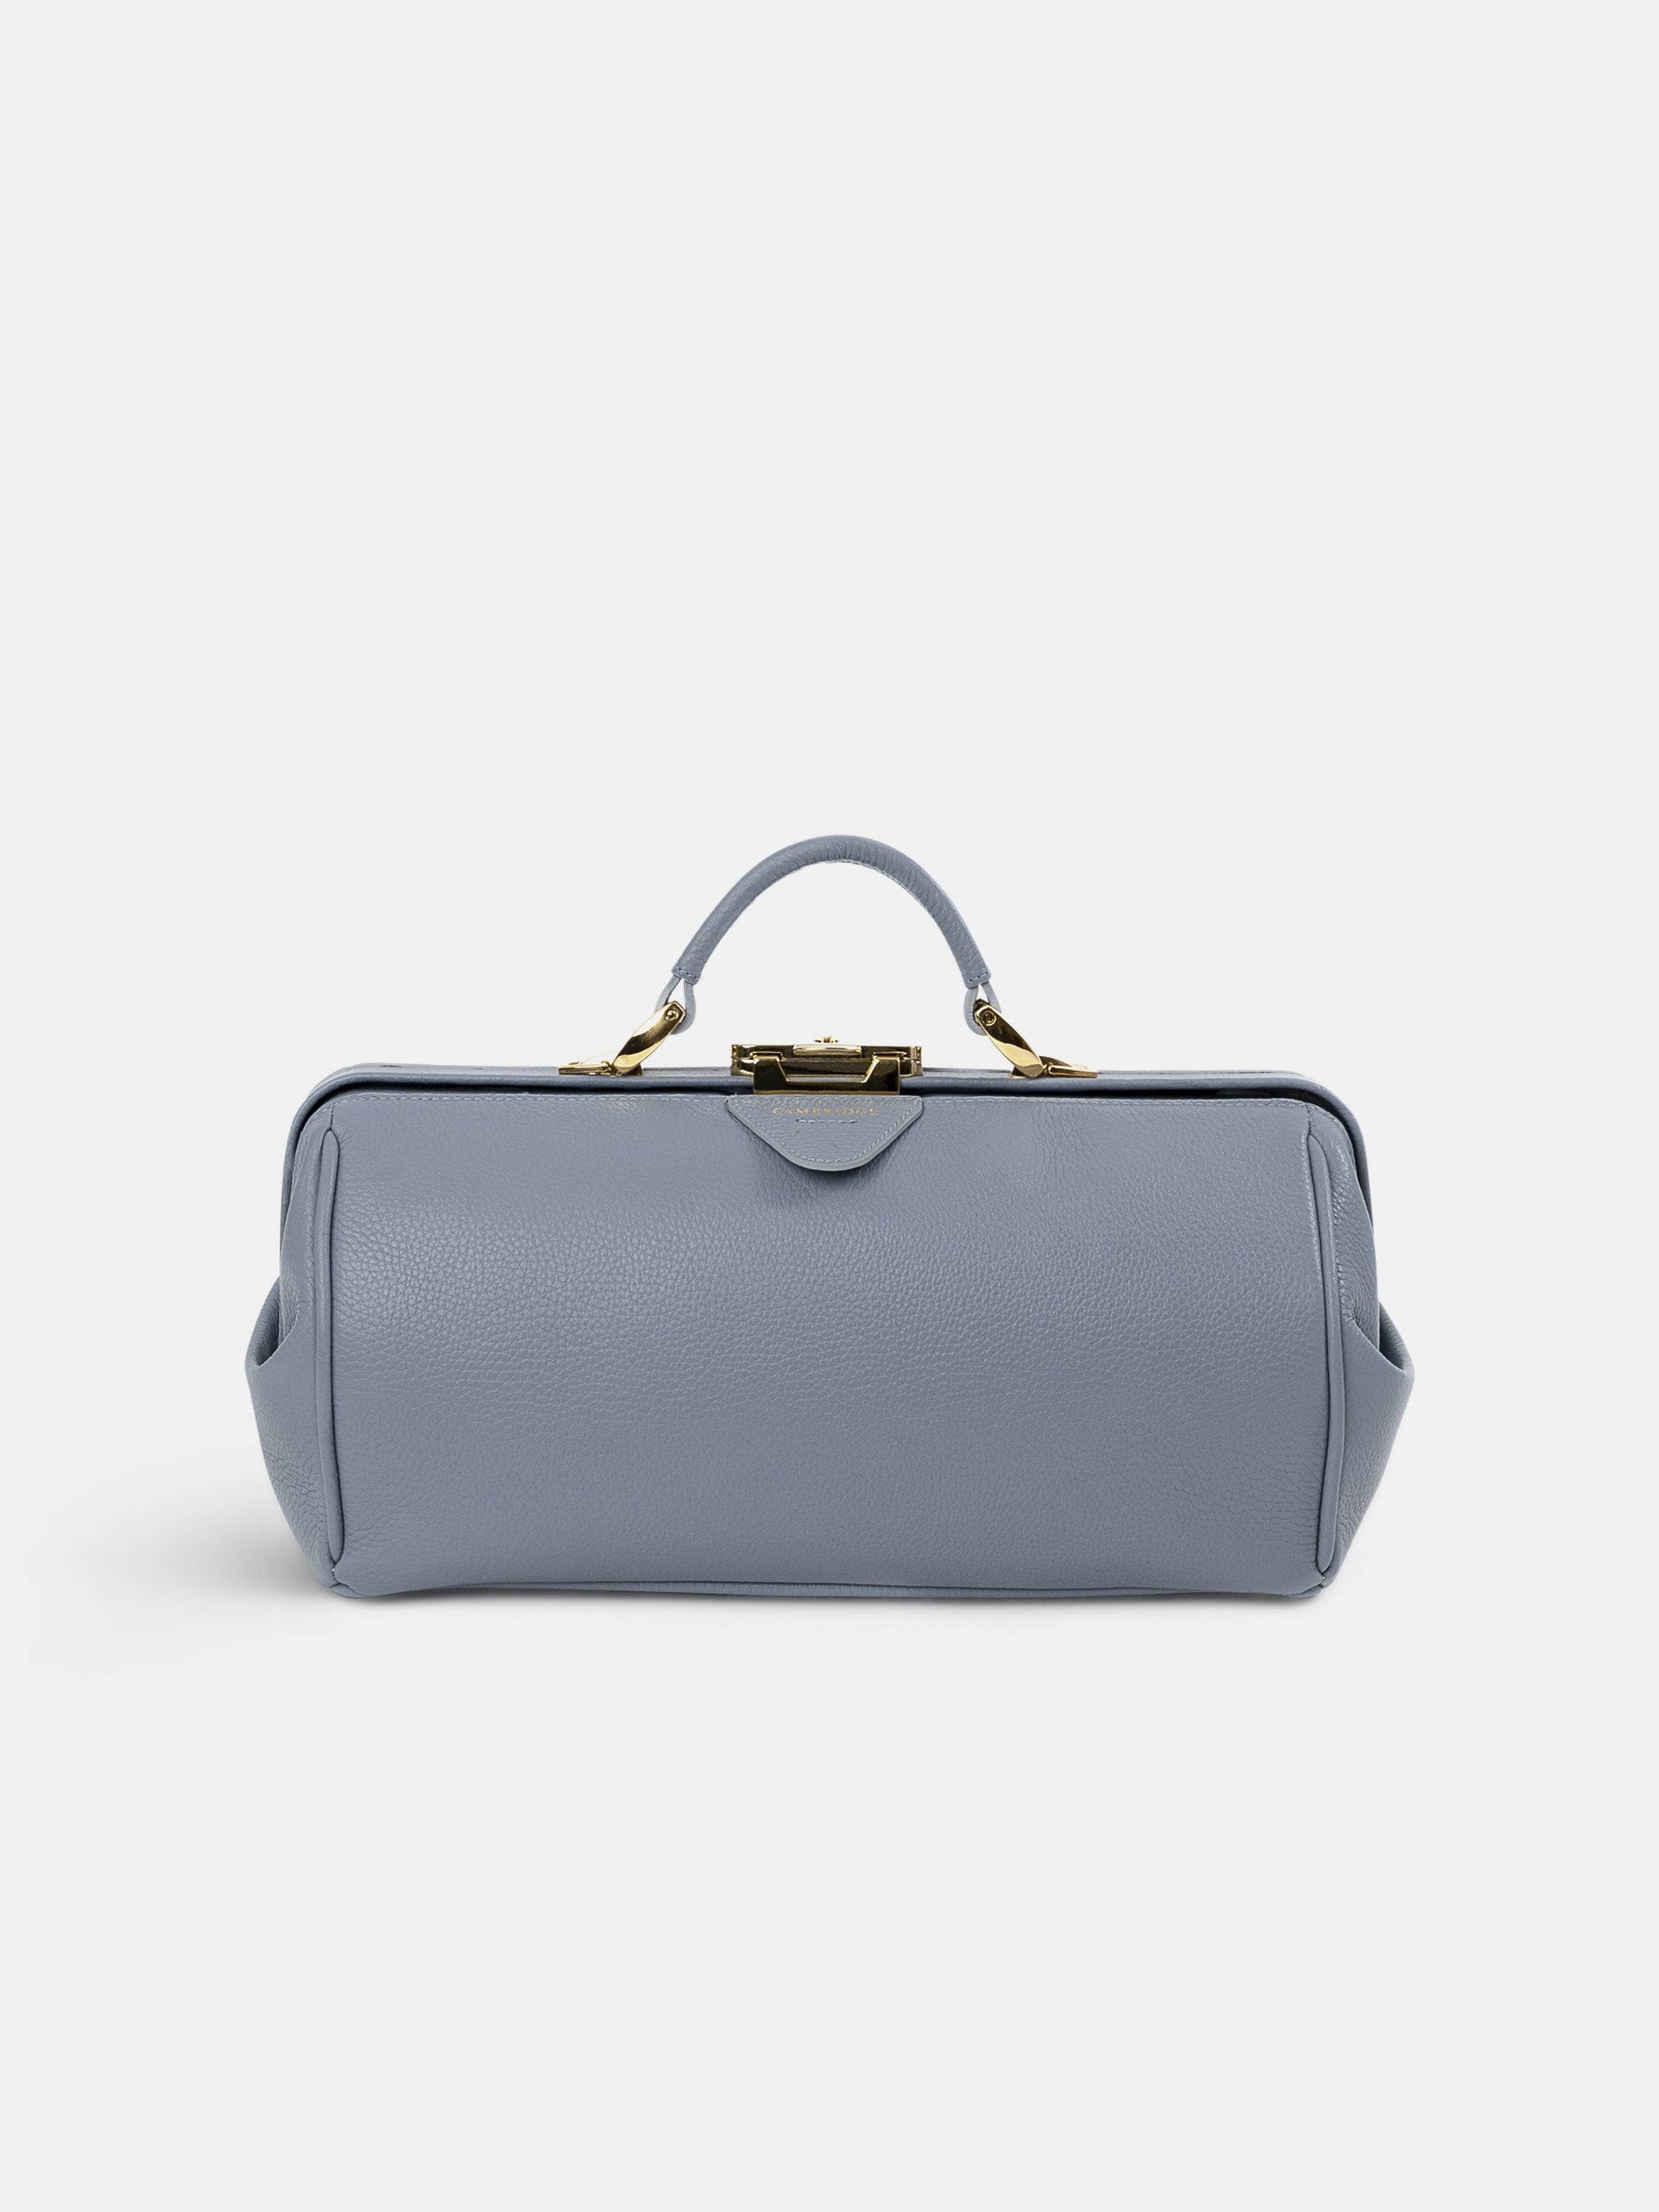 The Doctor's Bag -  French Grey Calf Grain